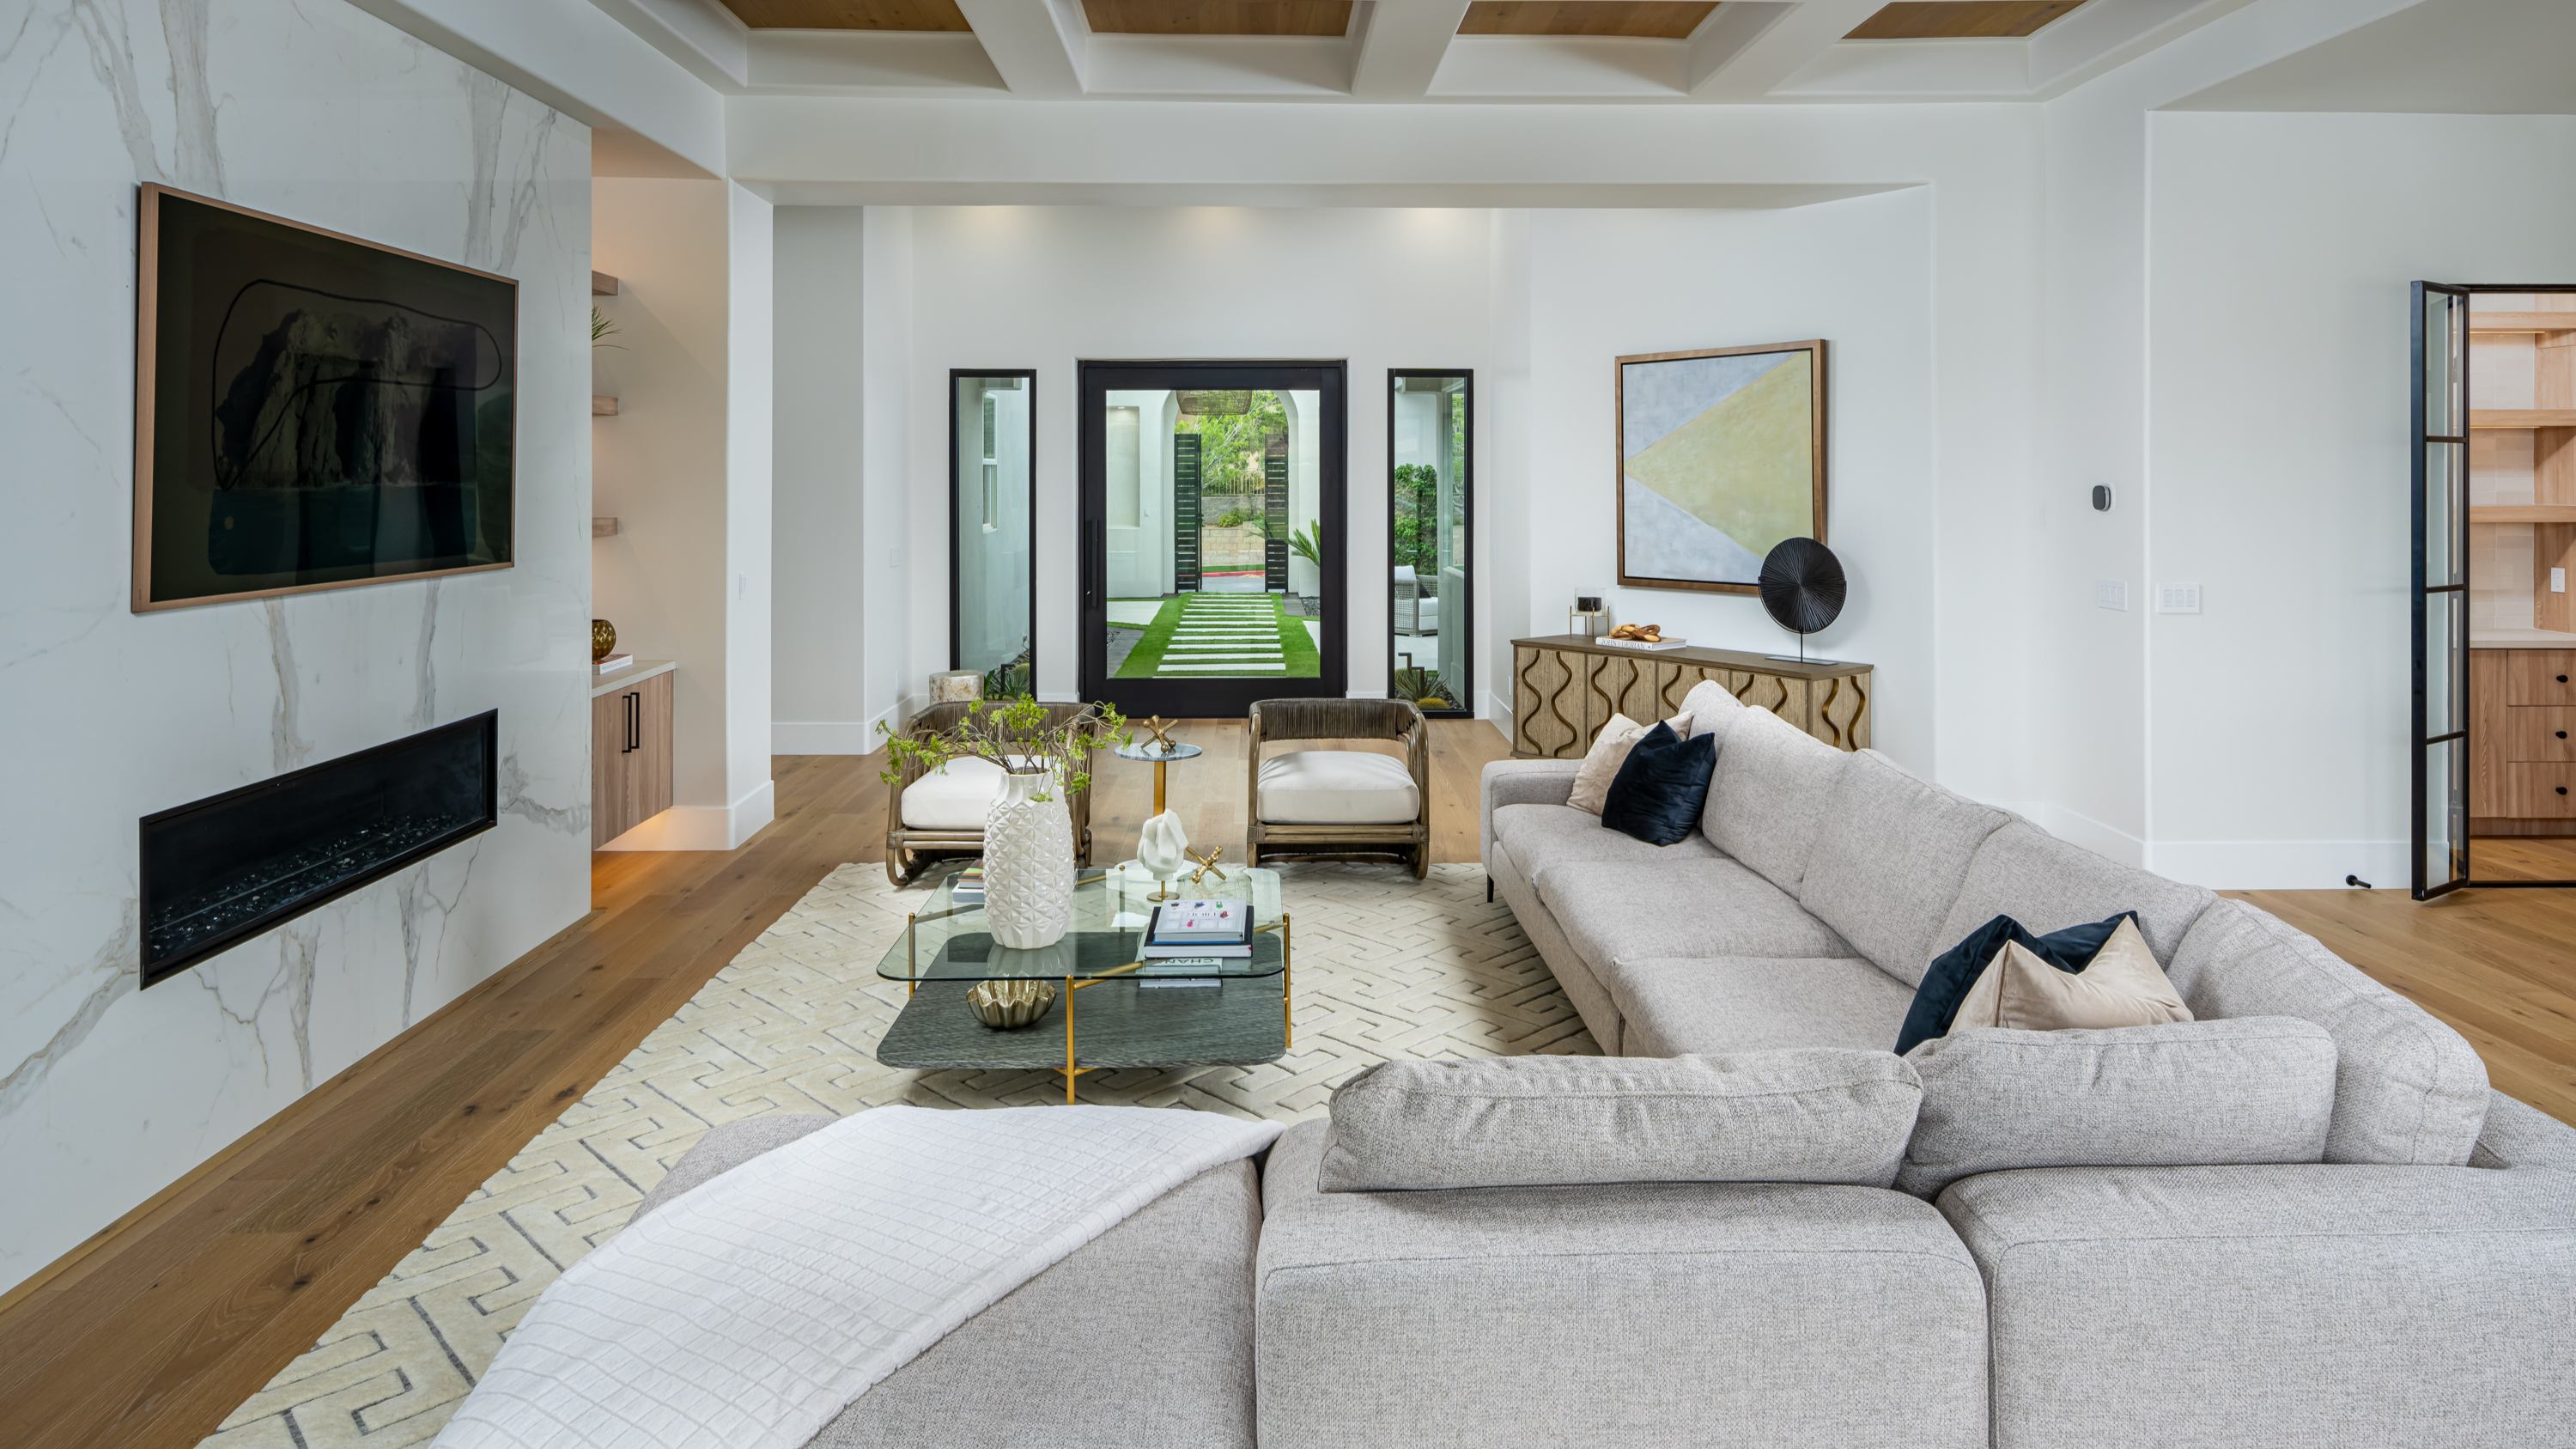 Spacious living room with coffered ceiling, neutral tones, a marble fireplace, and floor-to-ceiling windows with garden views.